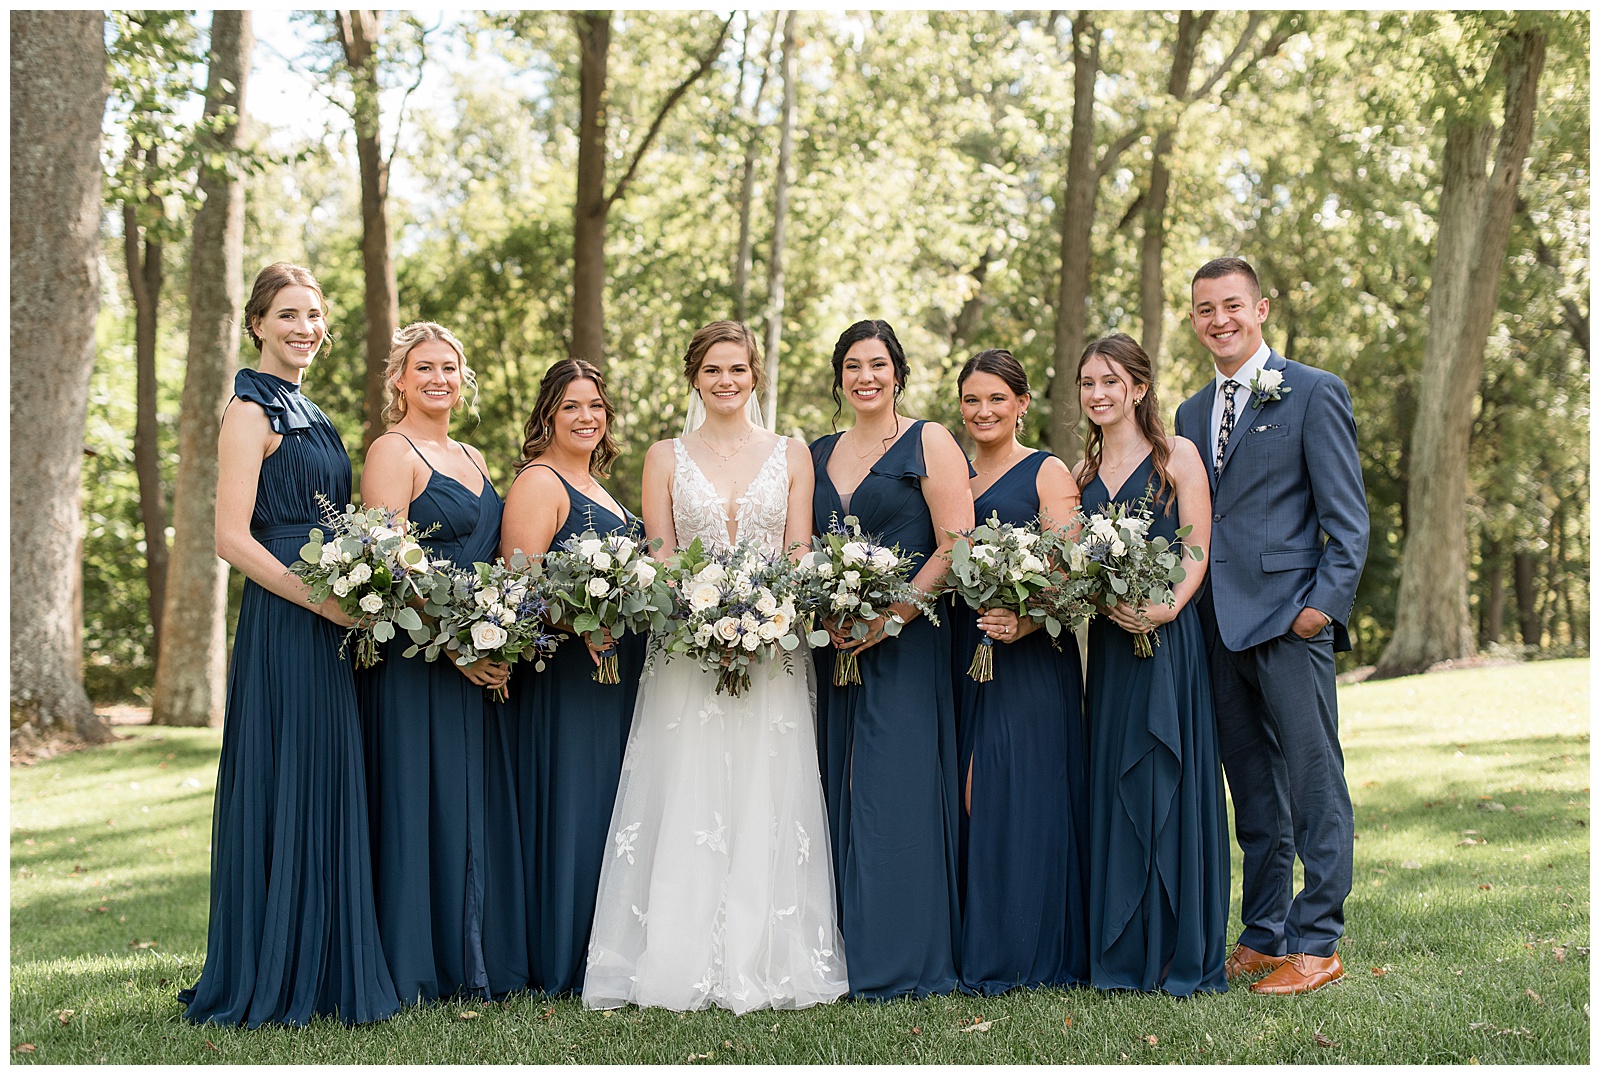 bride surrounded by her six bridesmaids in navy blue gowns and one bridesman man in navy blue suit at elizabeth furnace